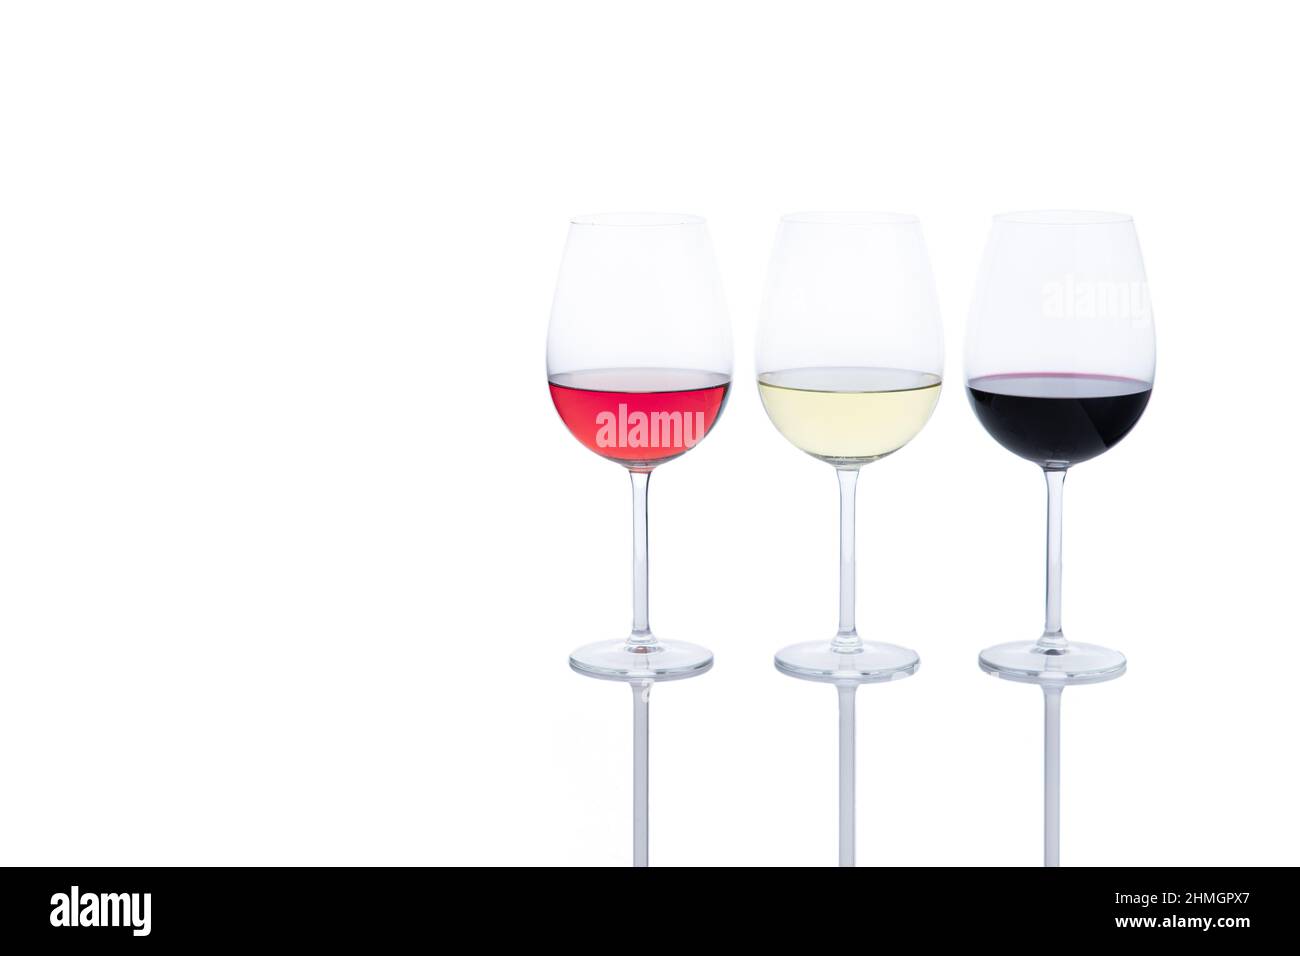 Glasses of red, white and rose wine in a row, illustration - Stock Image -  C039/6153 - Science Photo Library